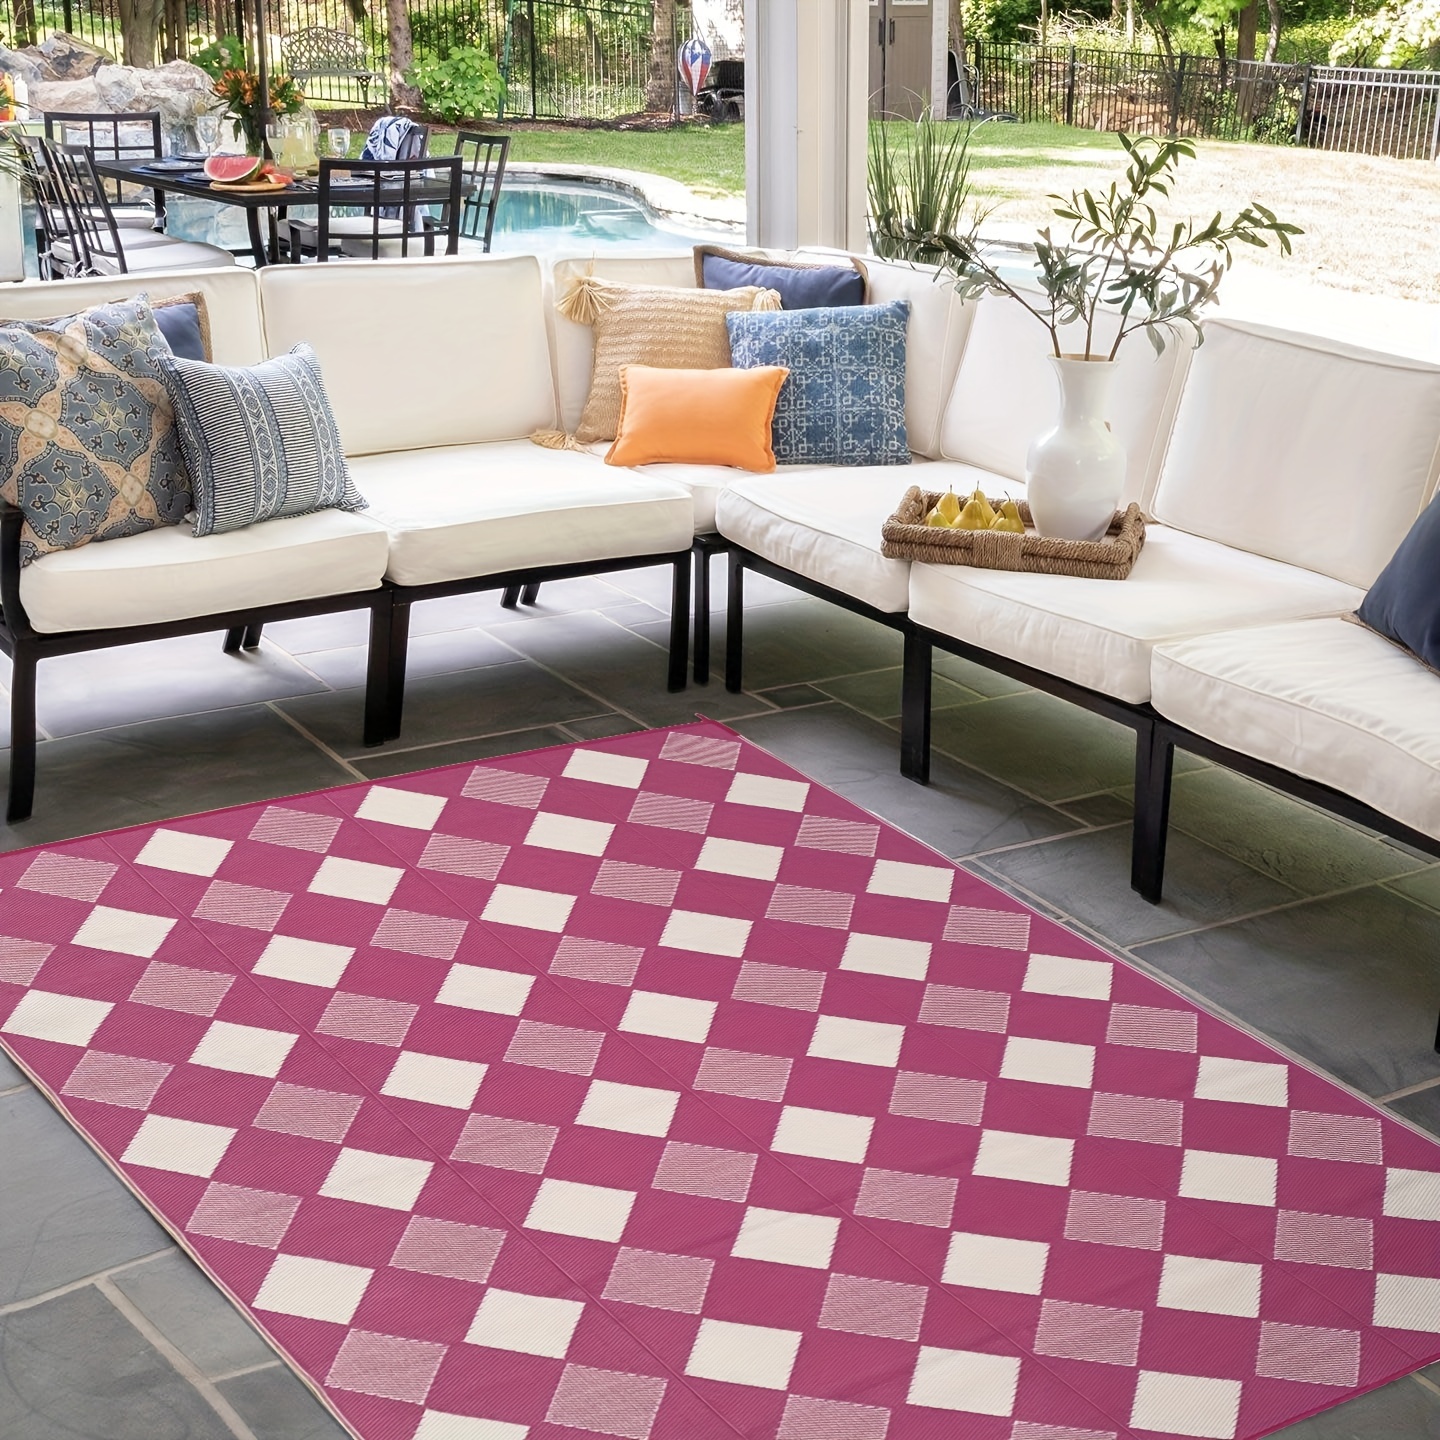 Reversible Mats - Outdoor Rugs 9'x12' for Patios Clearance, Plastic Straw  Rugs Waterproof, Portable, Outdoor RV Camping Rug, Garden, Balcony, Picnic